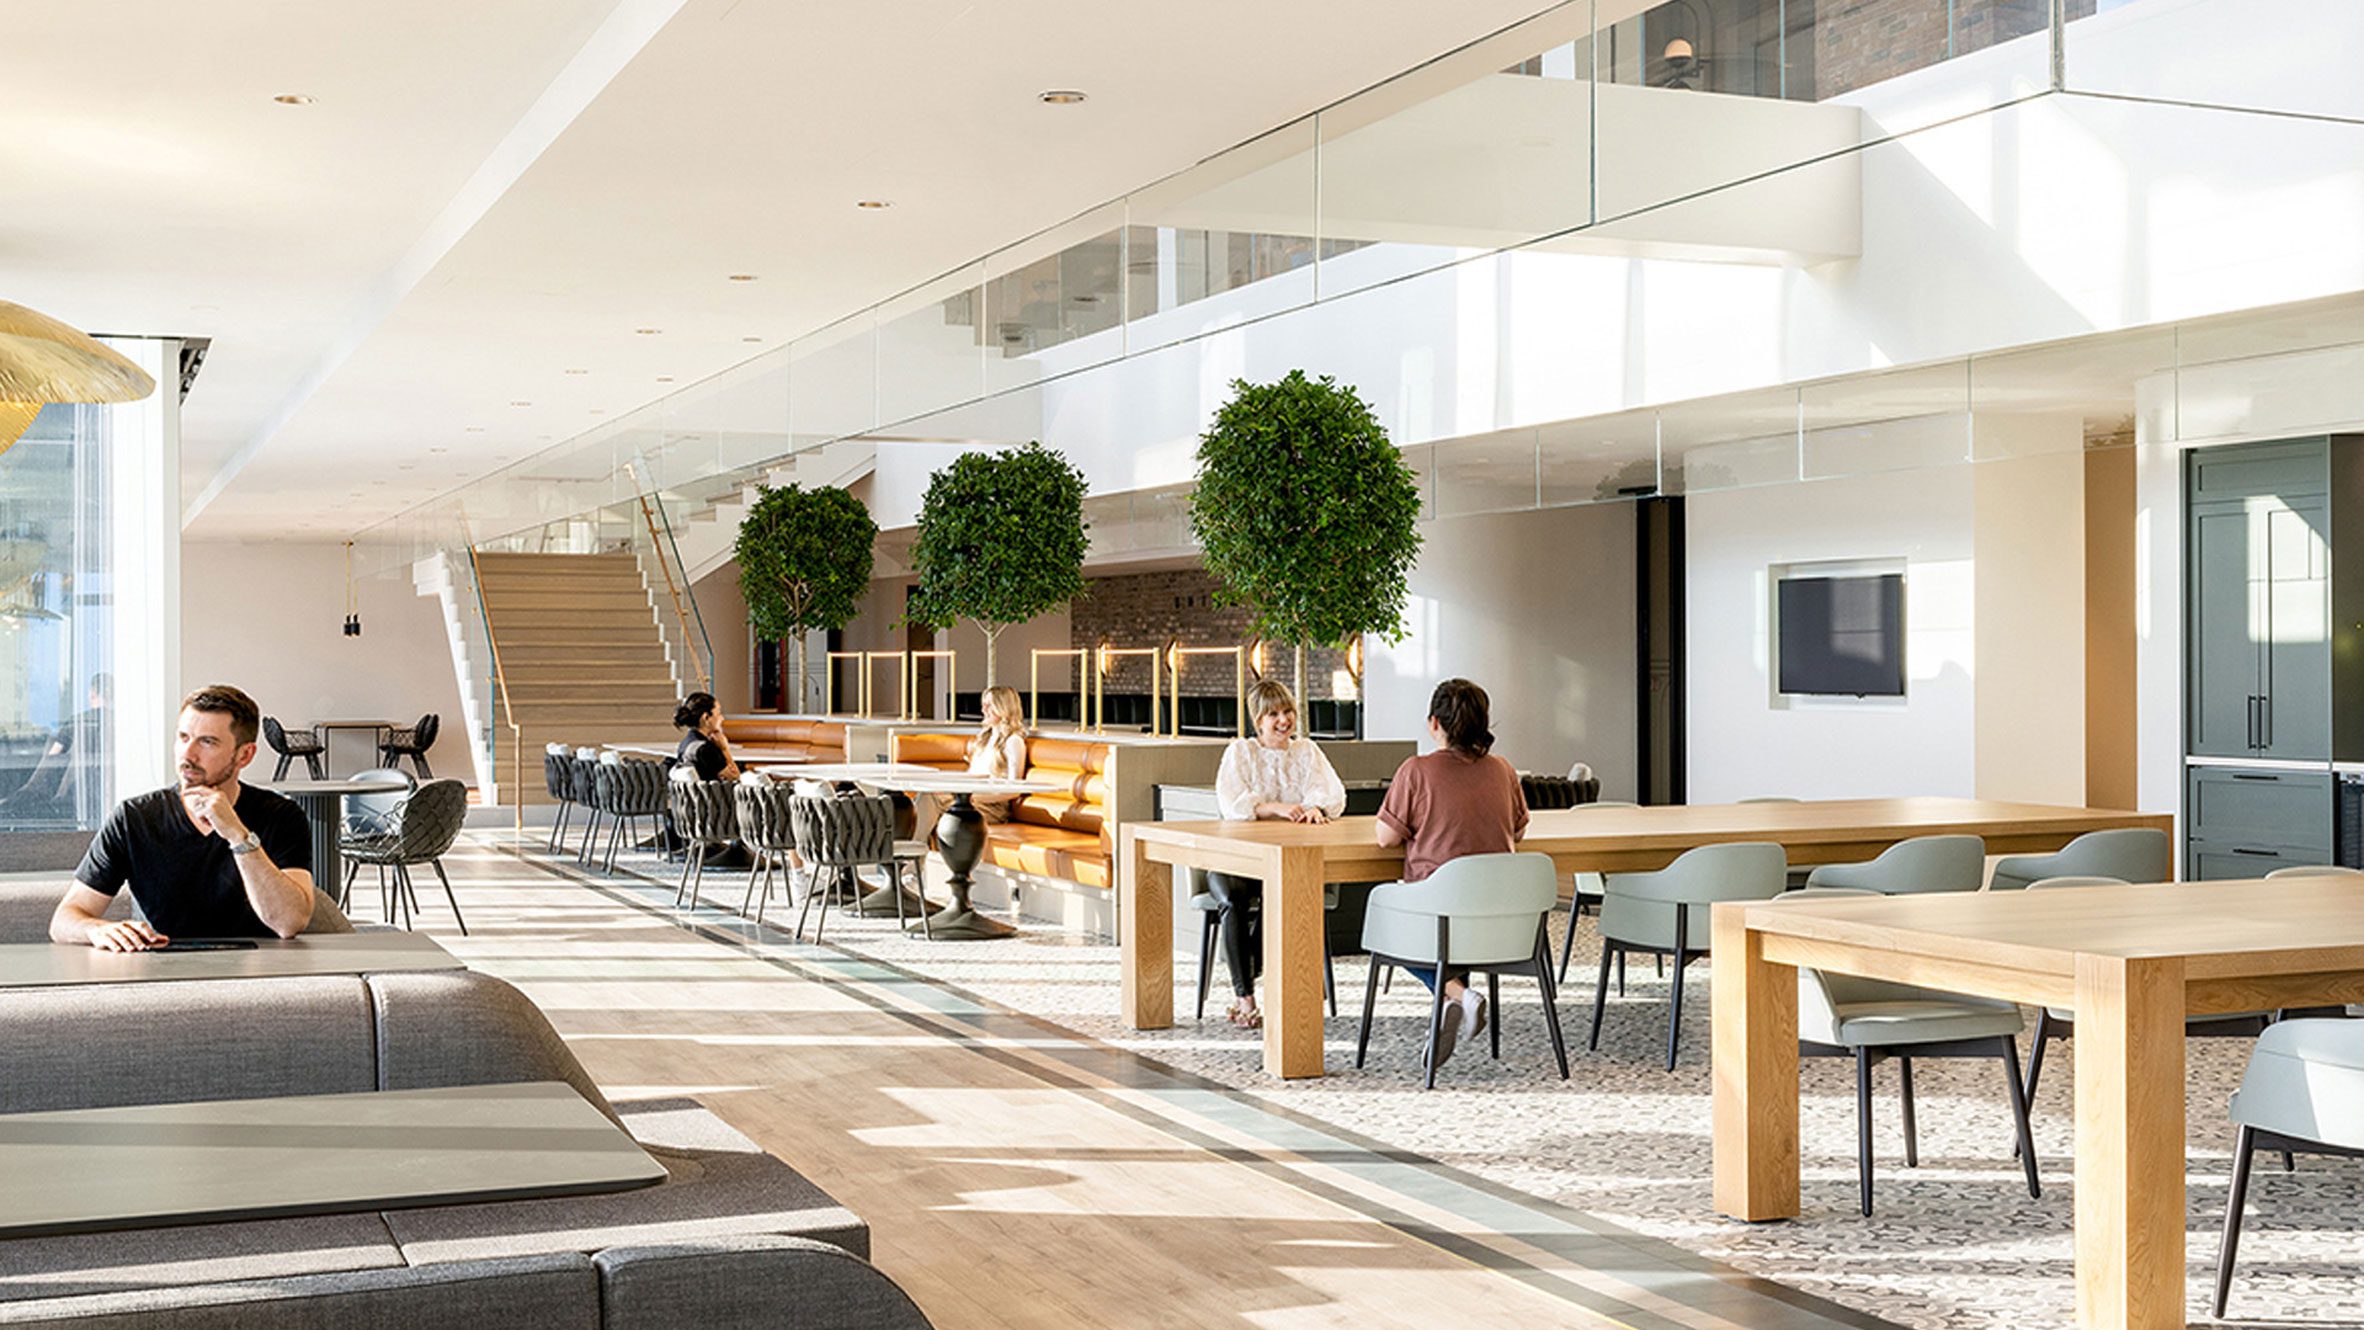 Boston Consulting Group's headquarters in Toronto designed by HOK